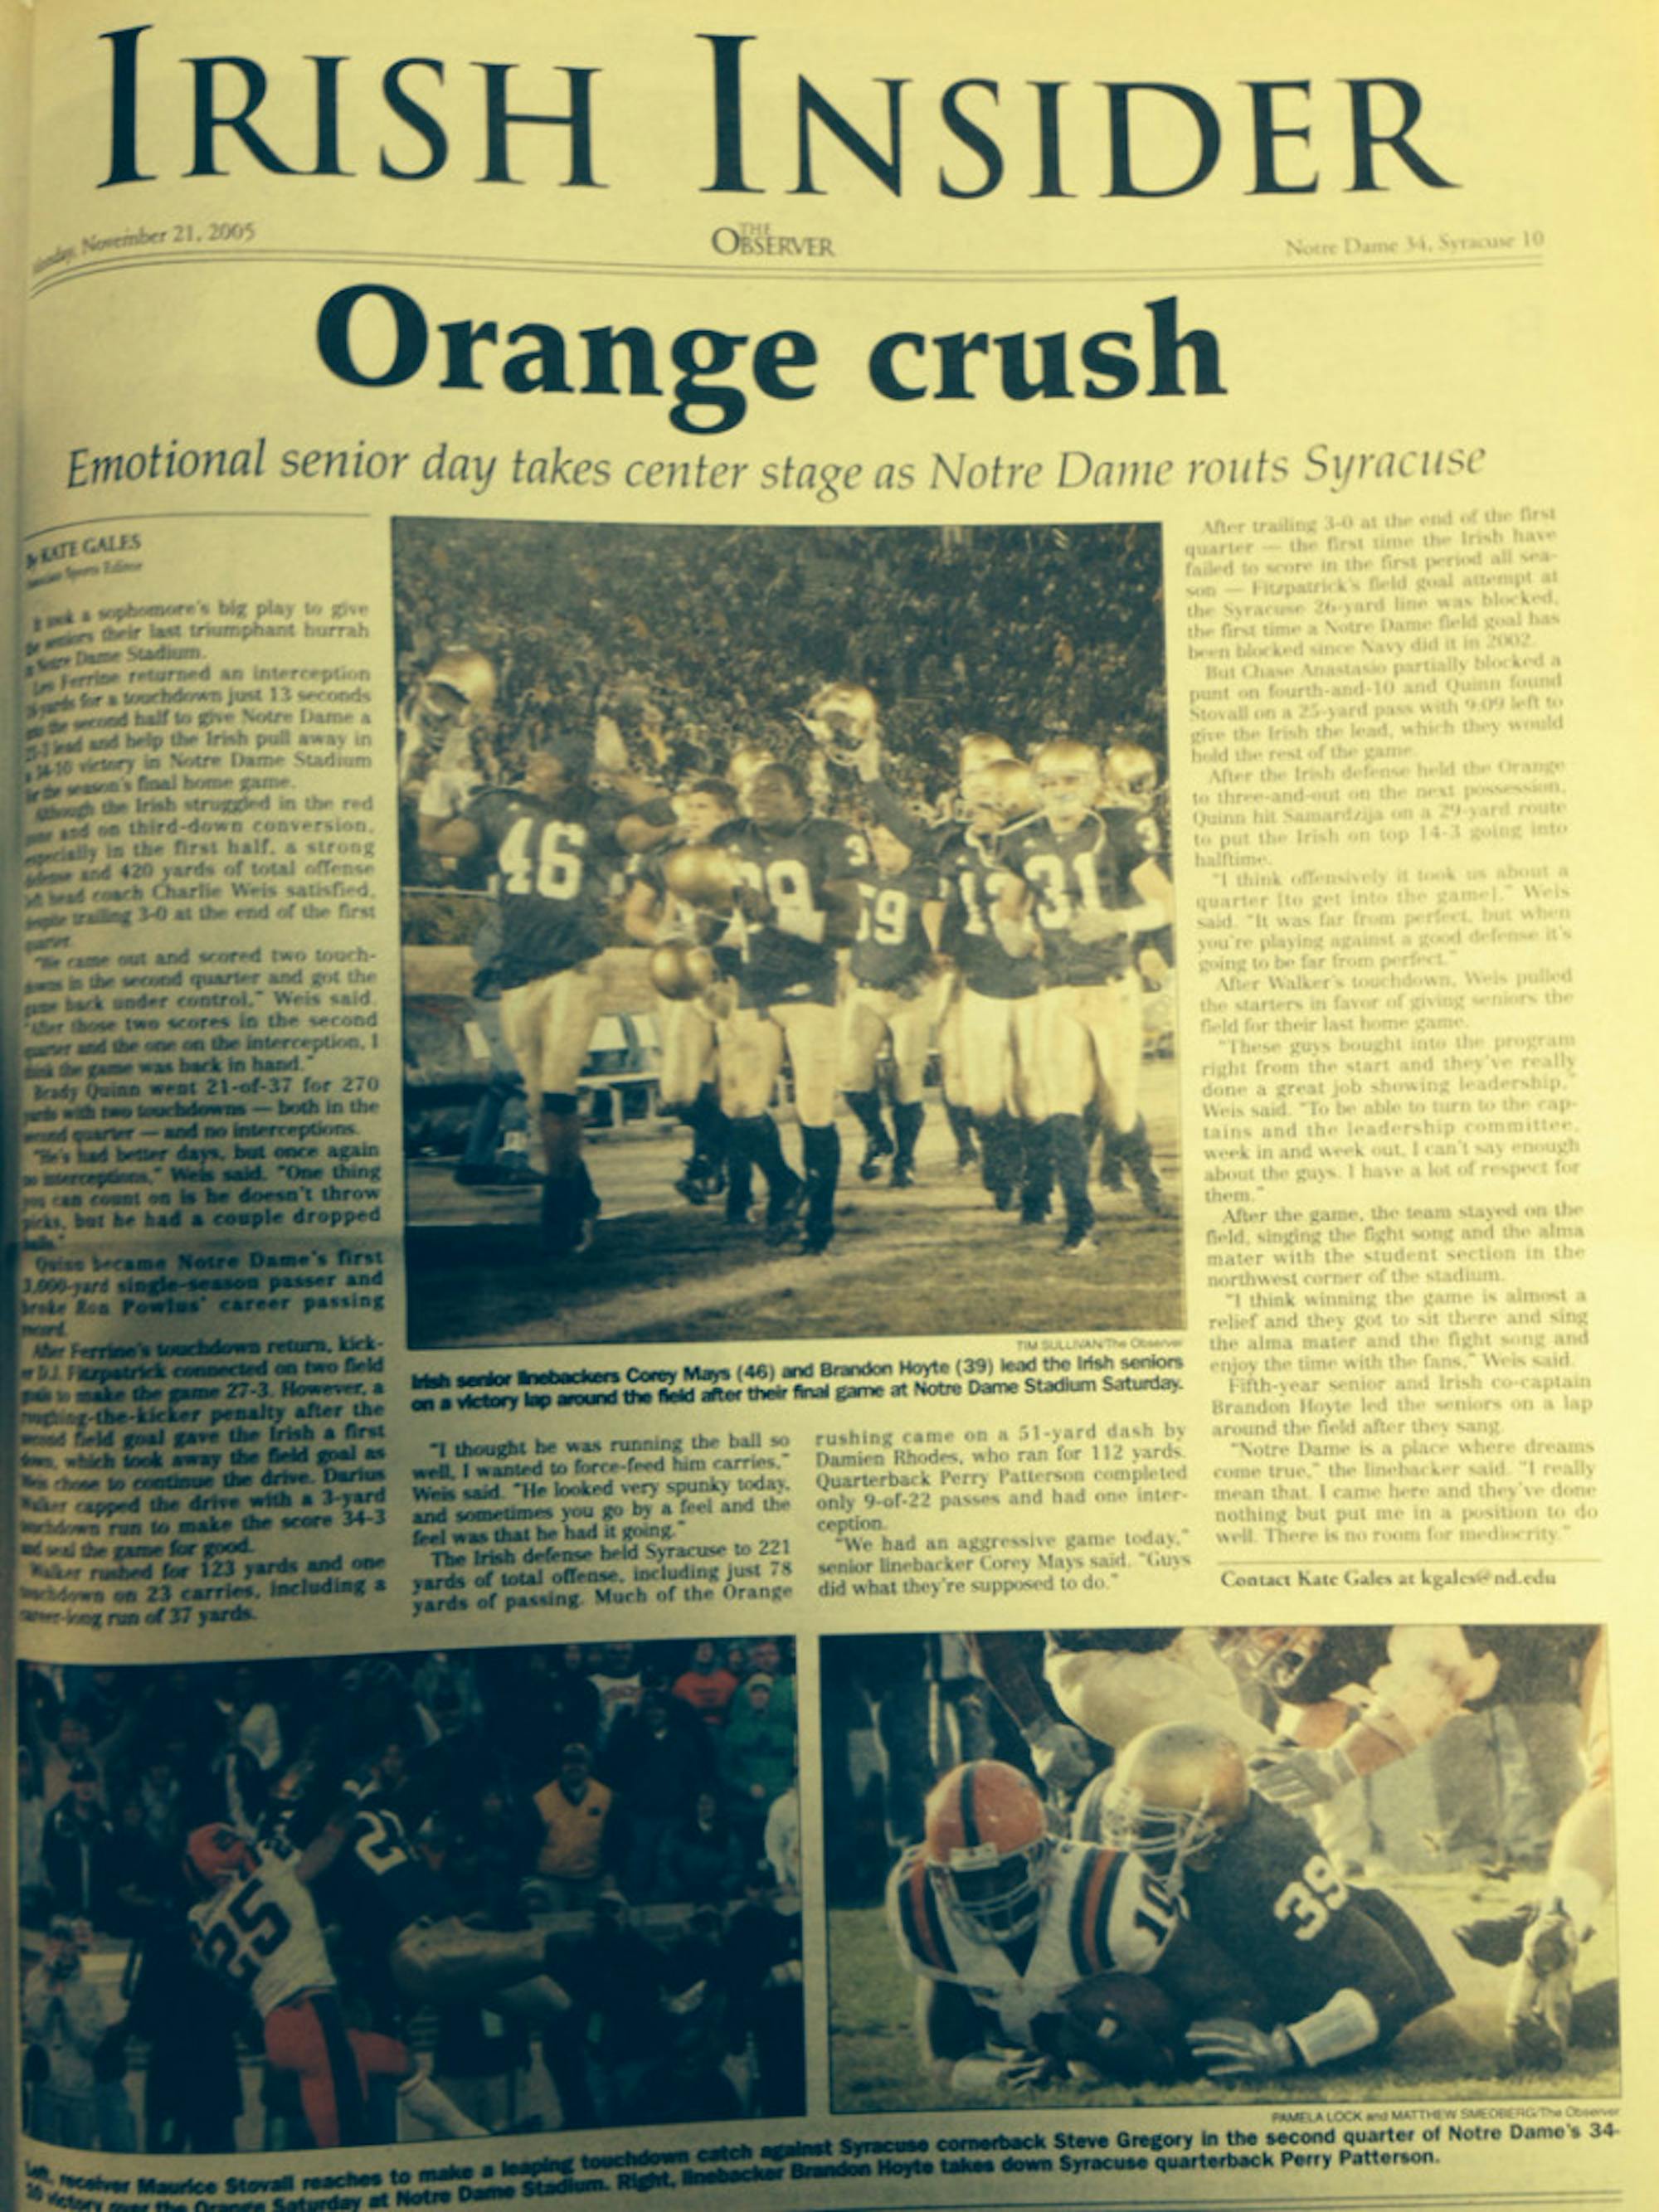 The Observer from Nov. 21, 2005.